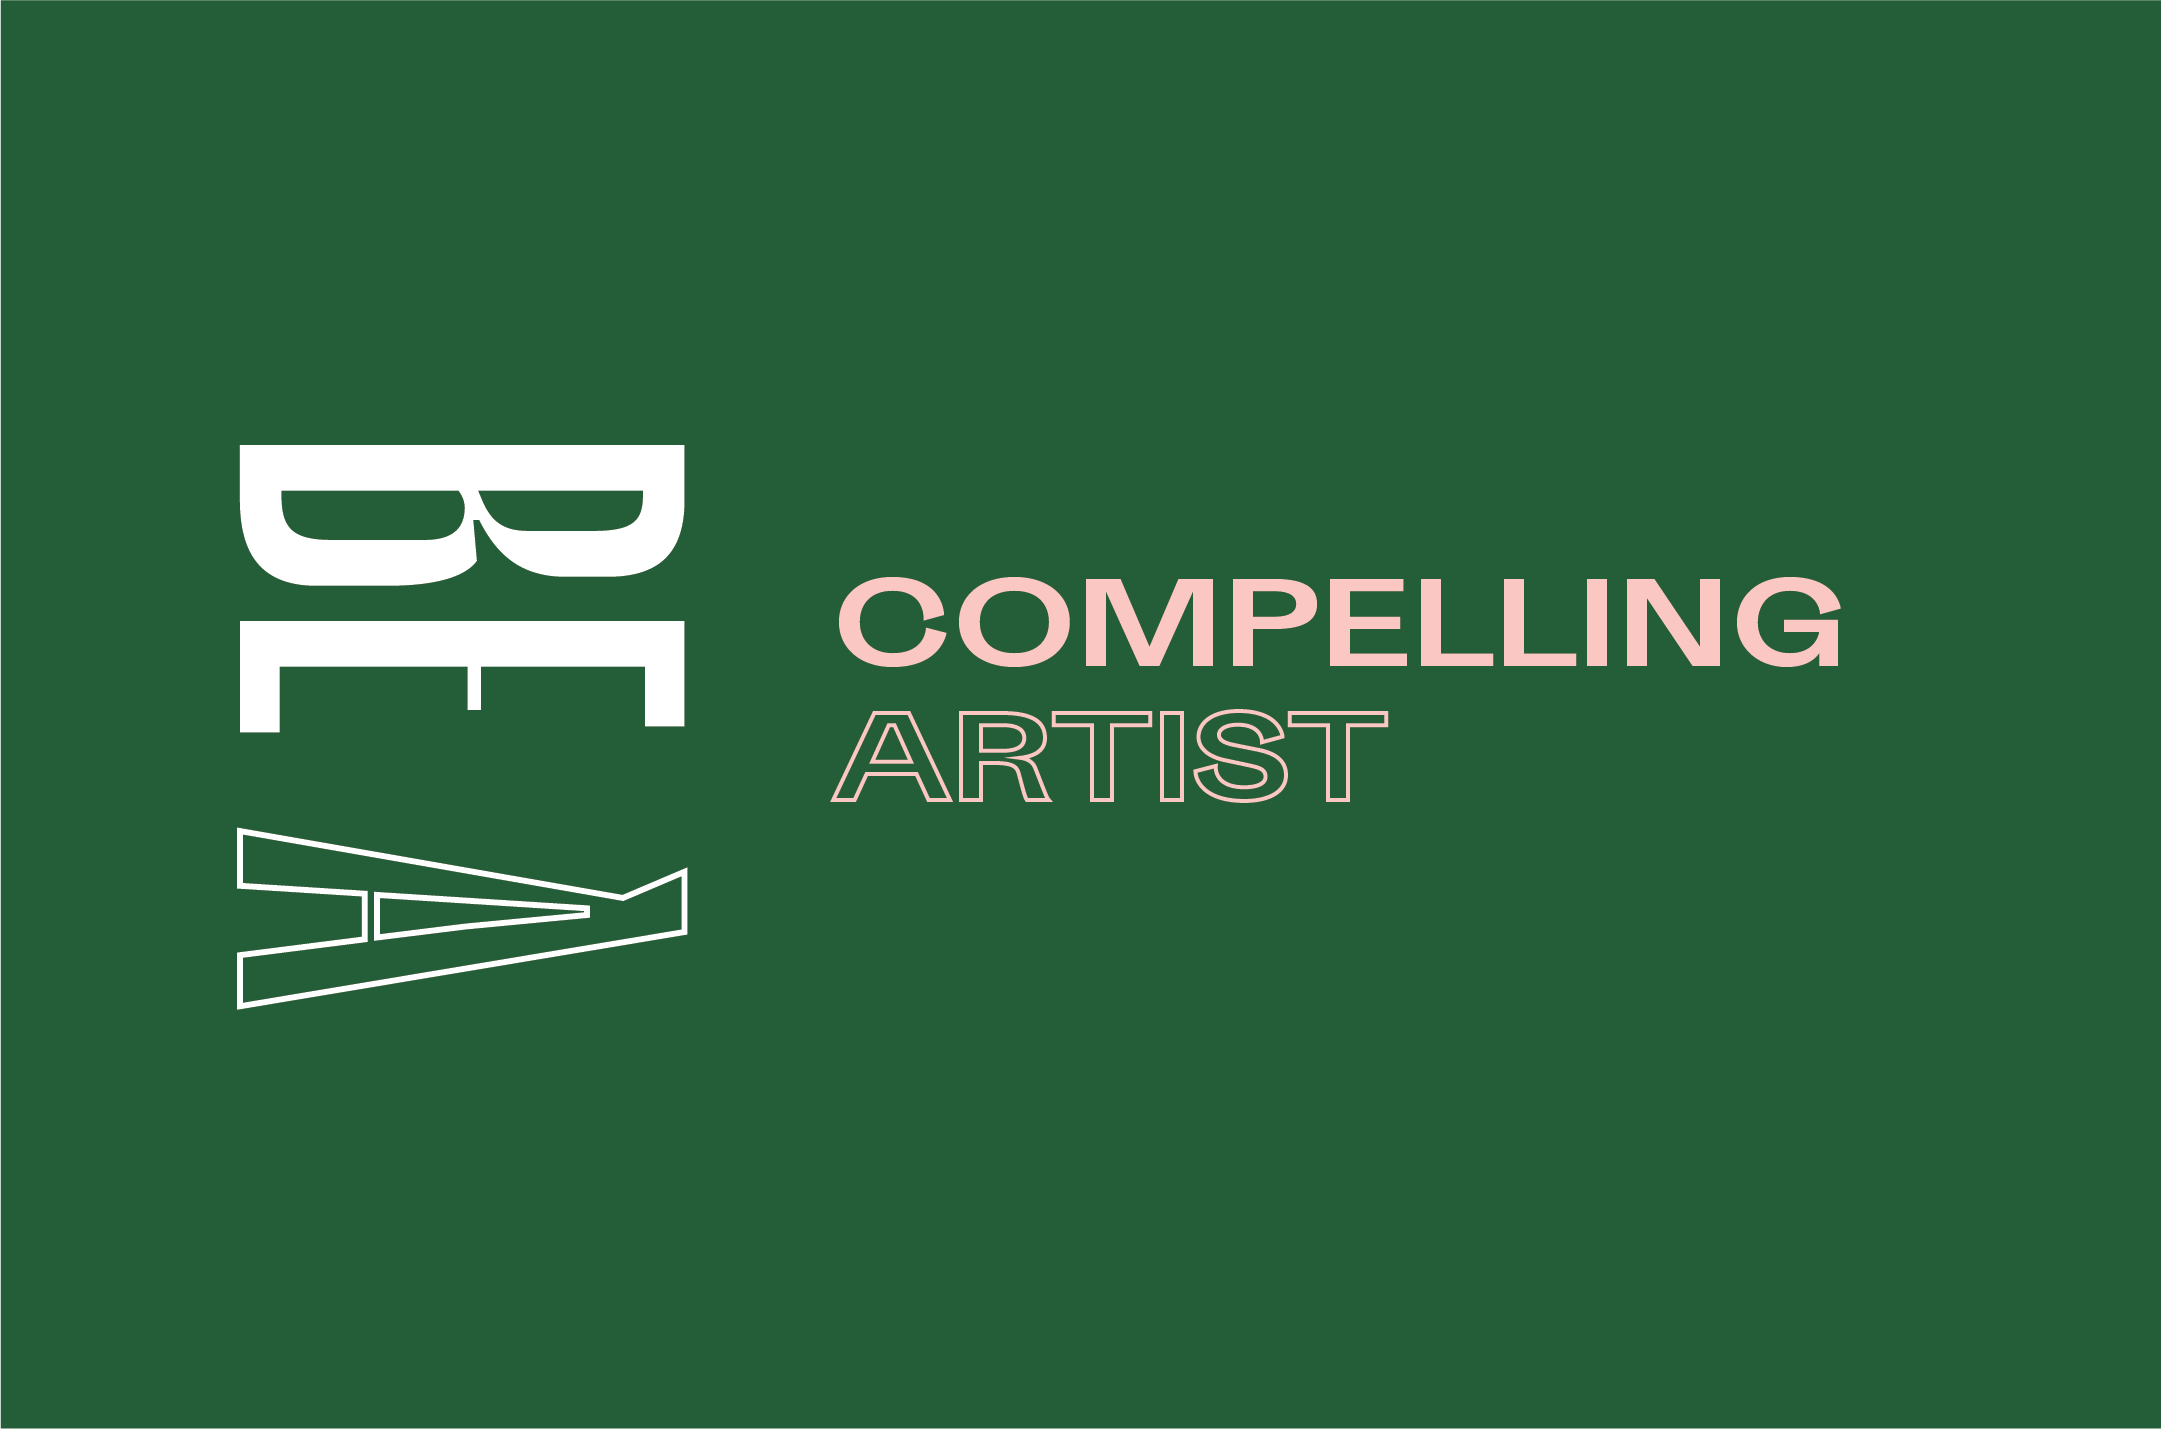 Be A Compelling Artist